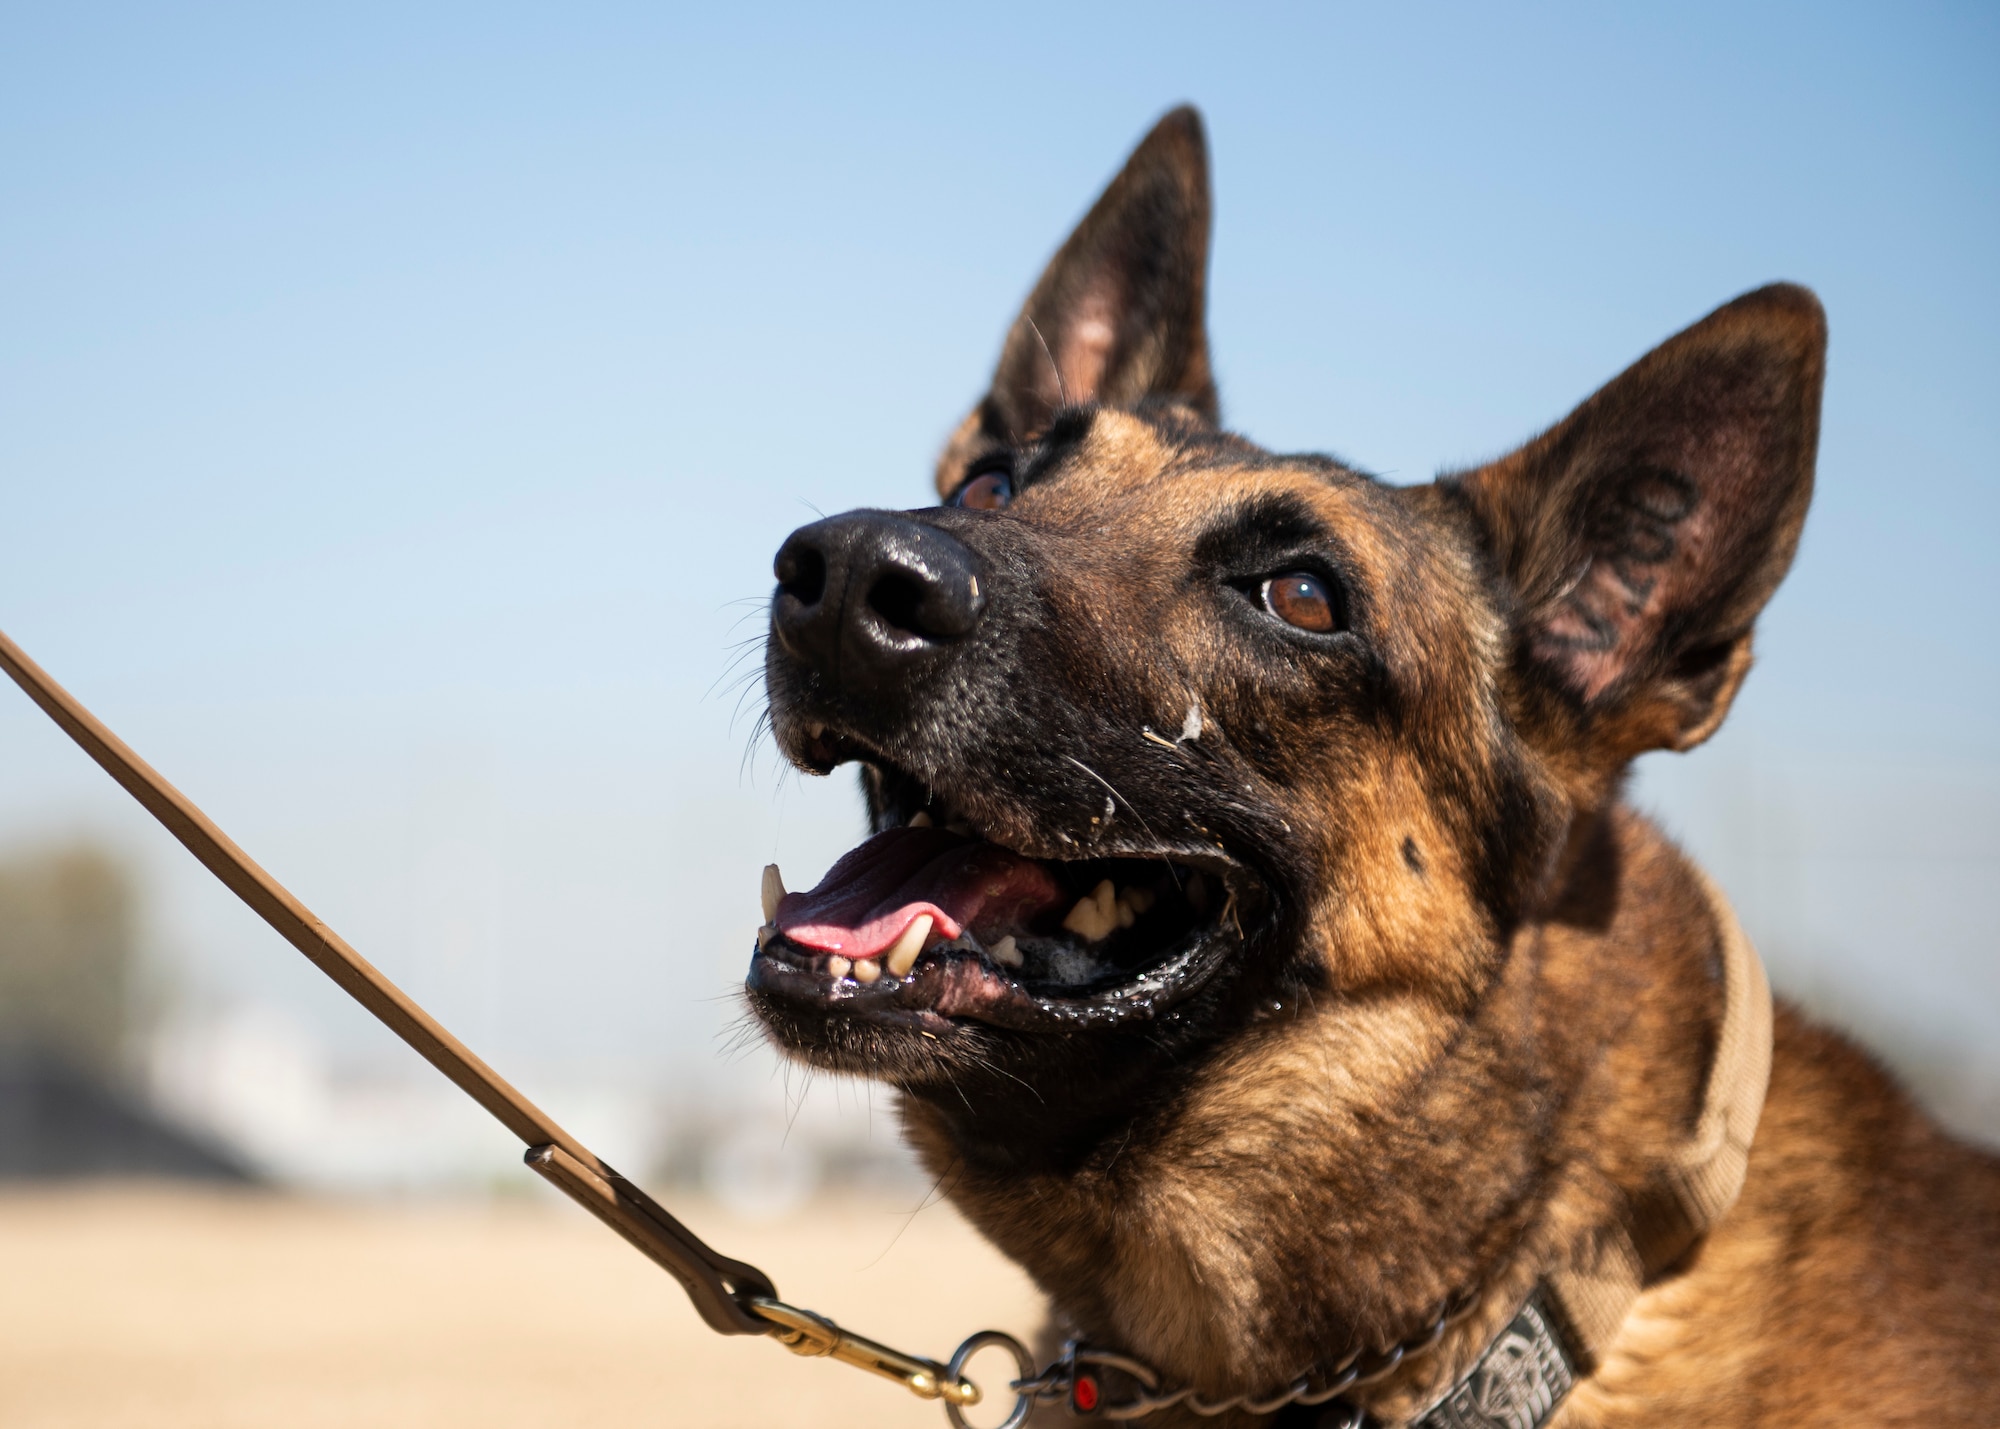 Military Working Dog Bruno watches U.S. Air Force Staff Sgt. Jeremy Hammer, 39th Security Forces Squadron MWD handler while playing, Feb. 26, 2020, at Incirlik Air Base, Turkey. Bruno’s job was to provide security to the members stationed at Incirlik Air Base and was accomplished at detection and bite work. (U.S. Air Force photo by Staff Sgt. Malissa Lott)